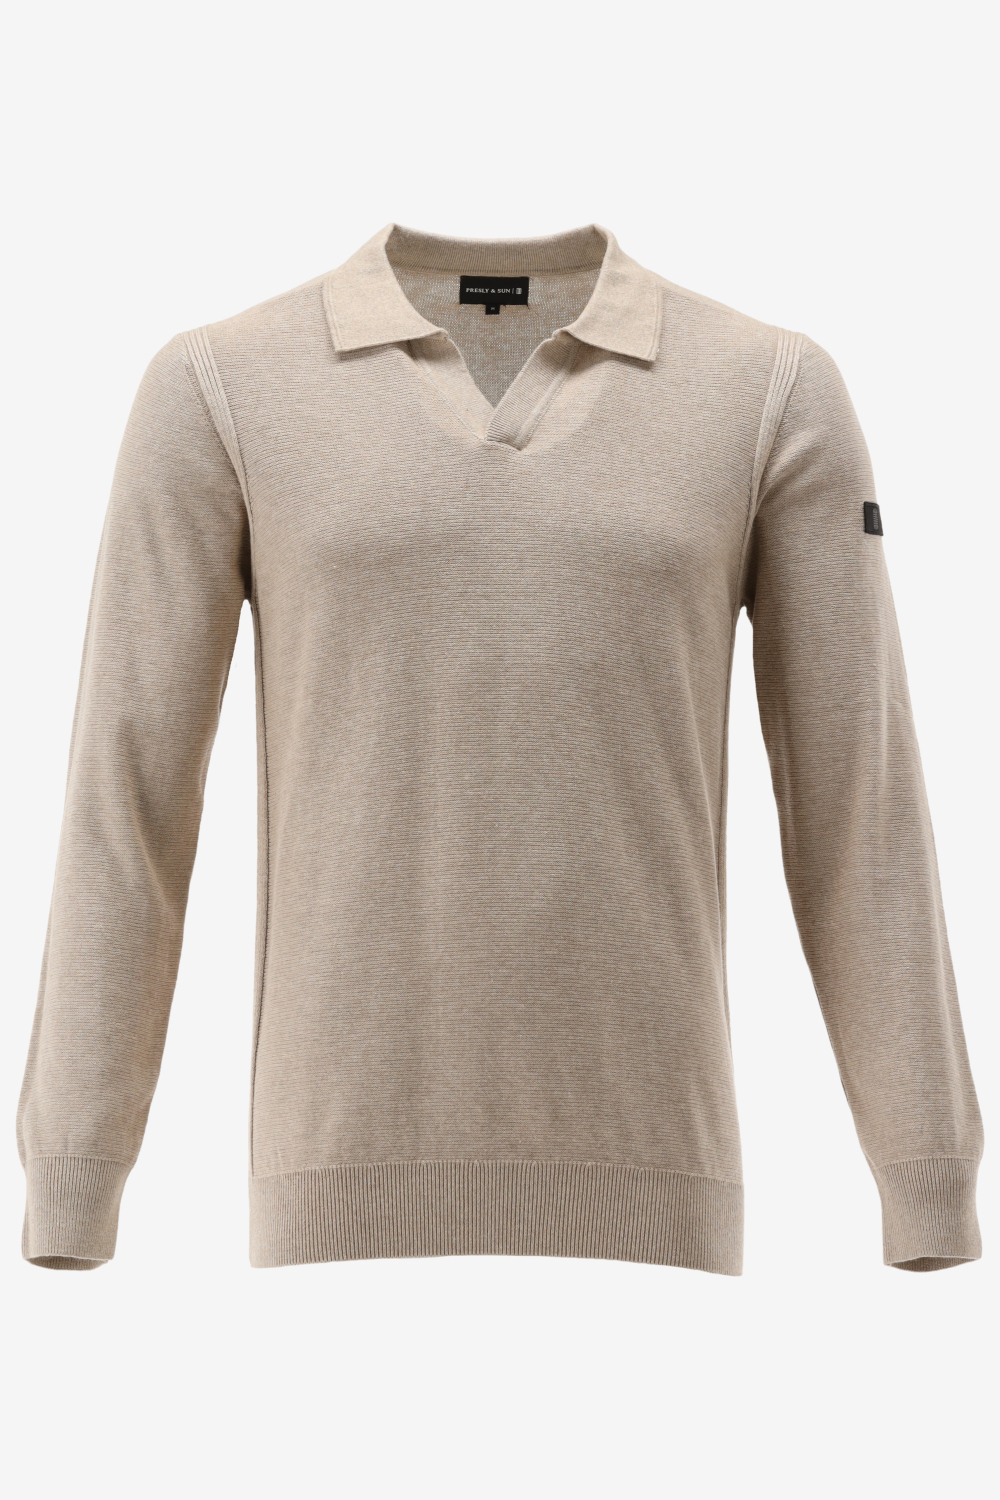 Presly & Sun - Heren open polo ribbed - Charles - Taupe - XL